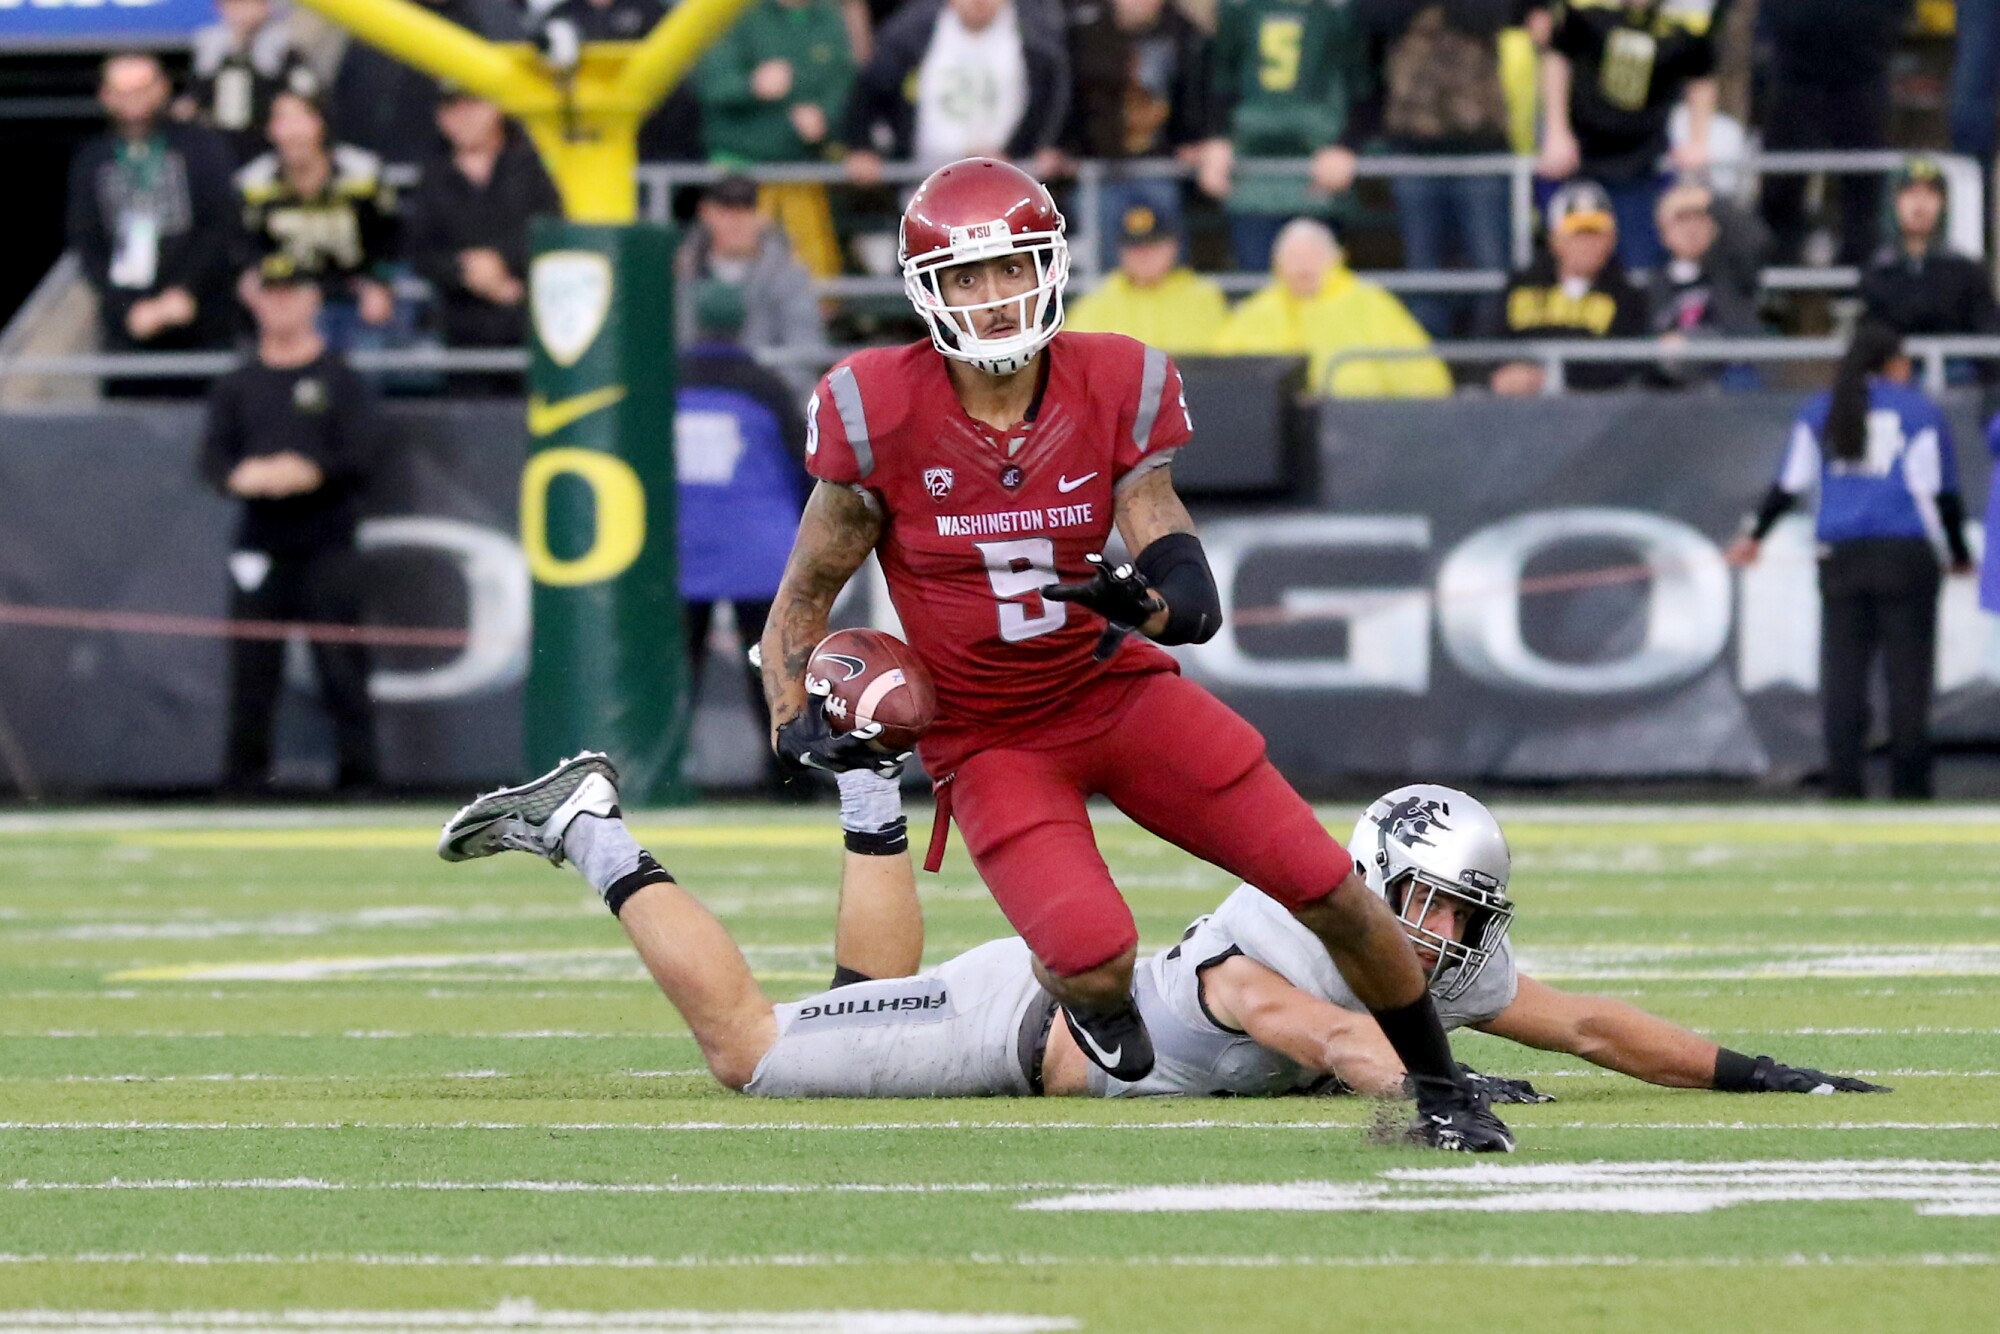 Gabe Marks leaves an Oregon defender on the ground after making a reception for Washington State.